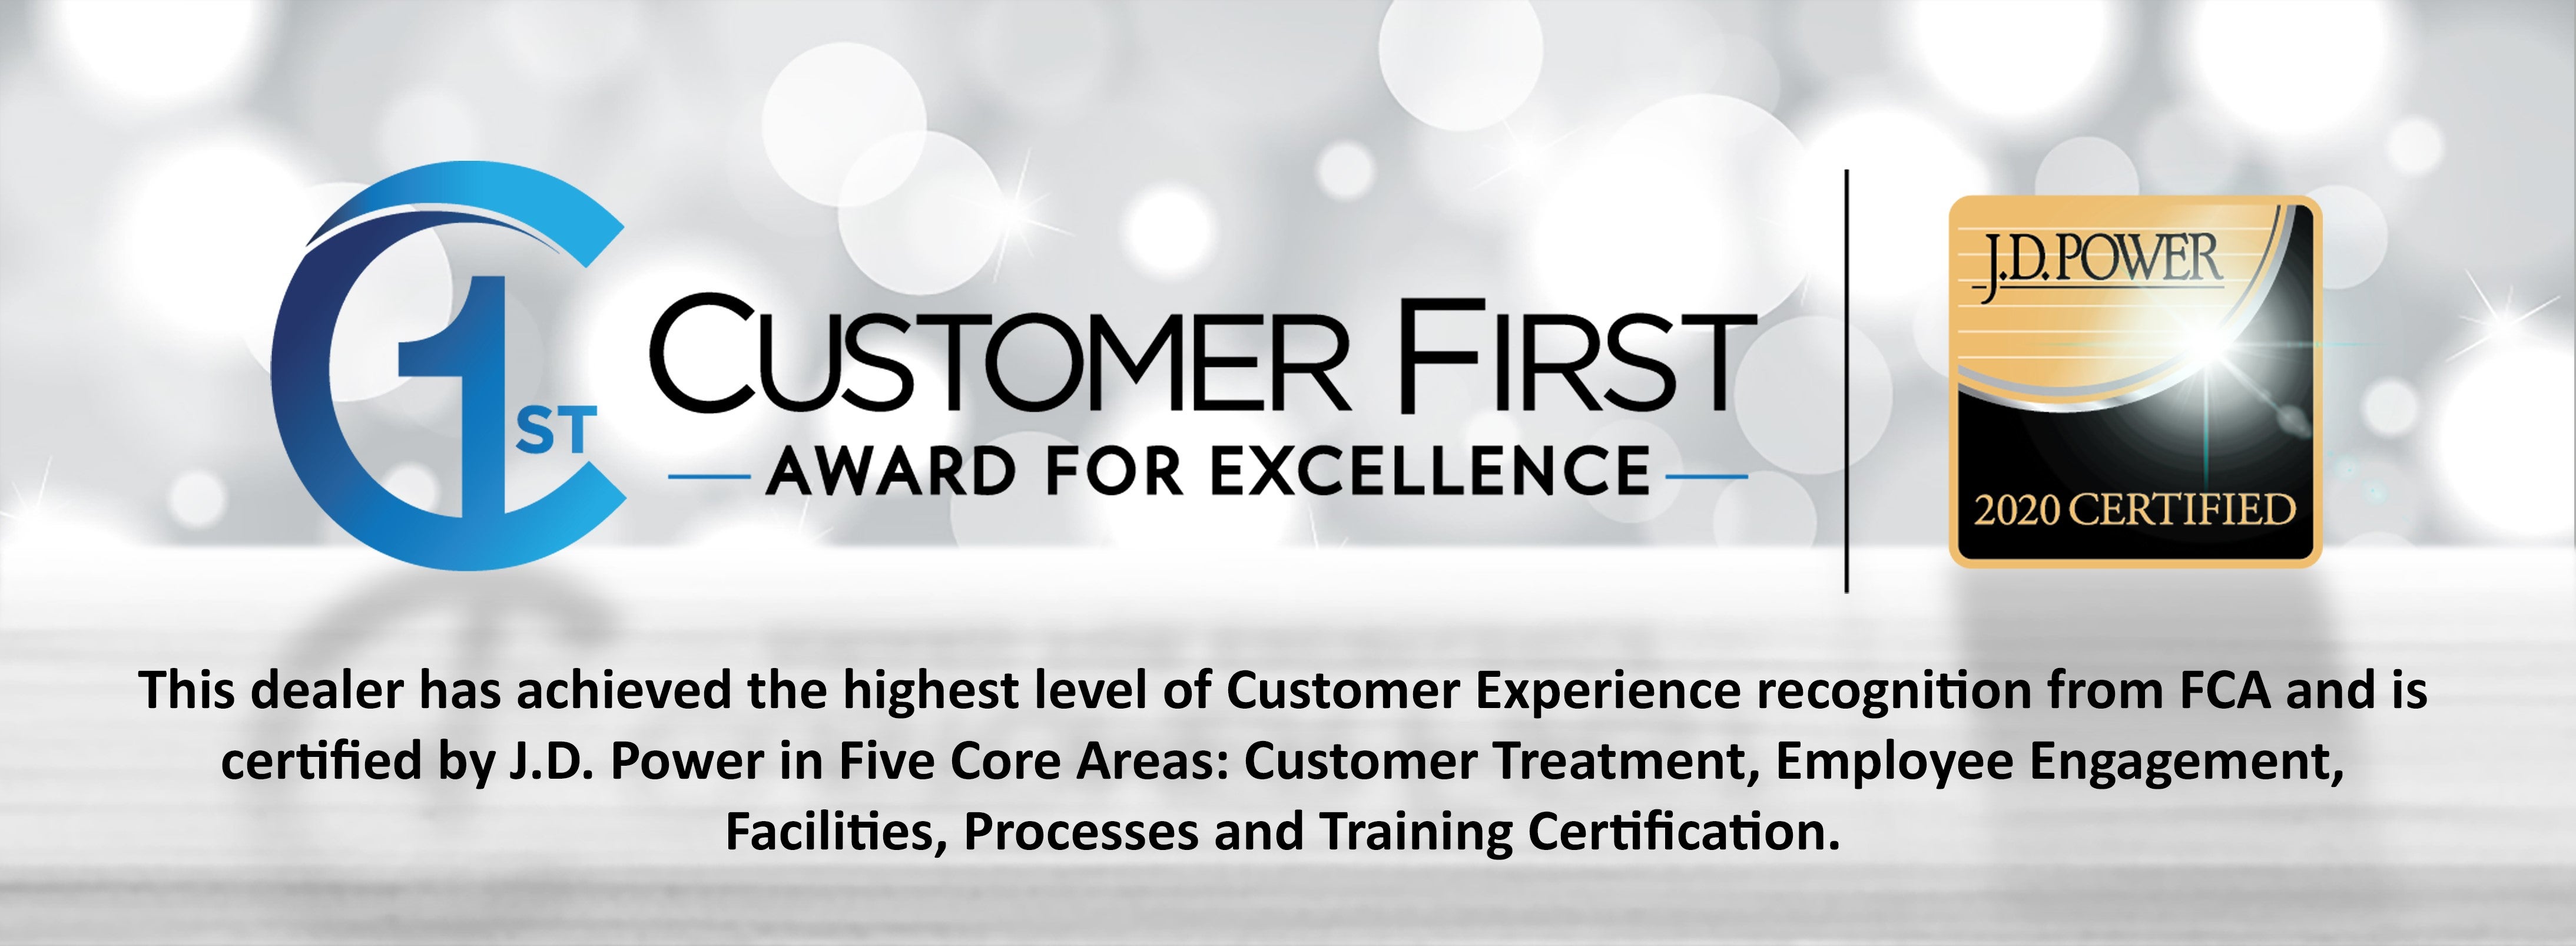 Customer First Award for Excellence for 2019 at Homan Chrysler Dodge Jeep Ram of Waupun in Waupun, WI